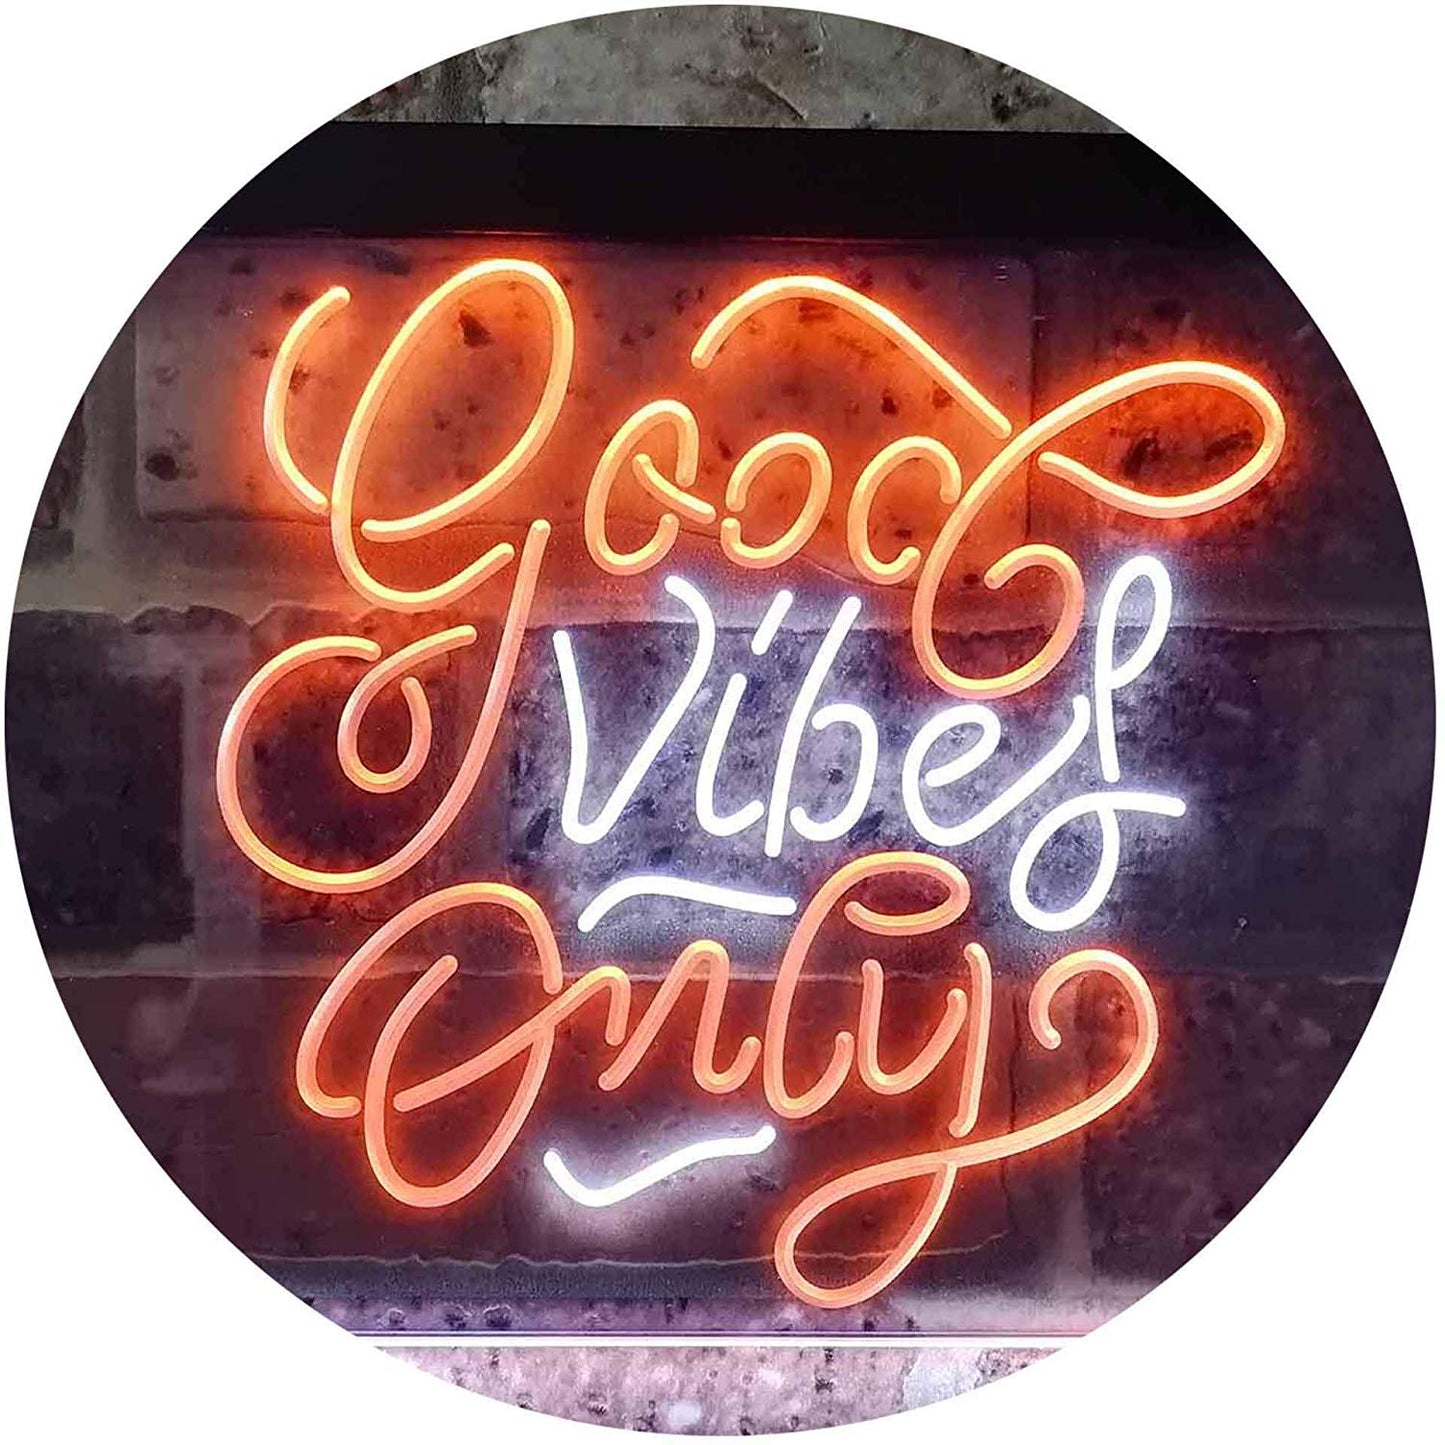 Good Vibes Only LED Neon Light Sign - Way Up Gifts